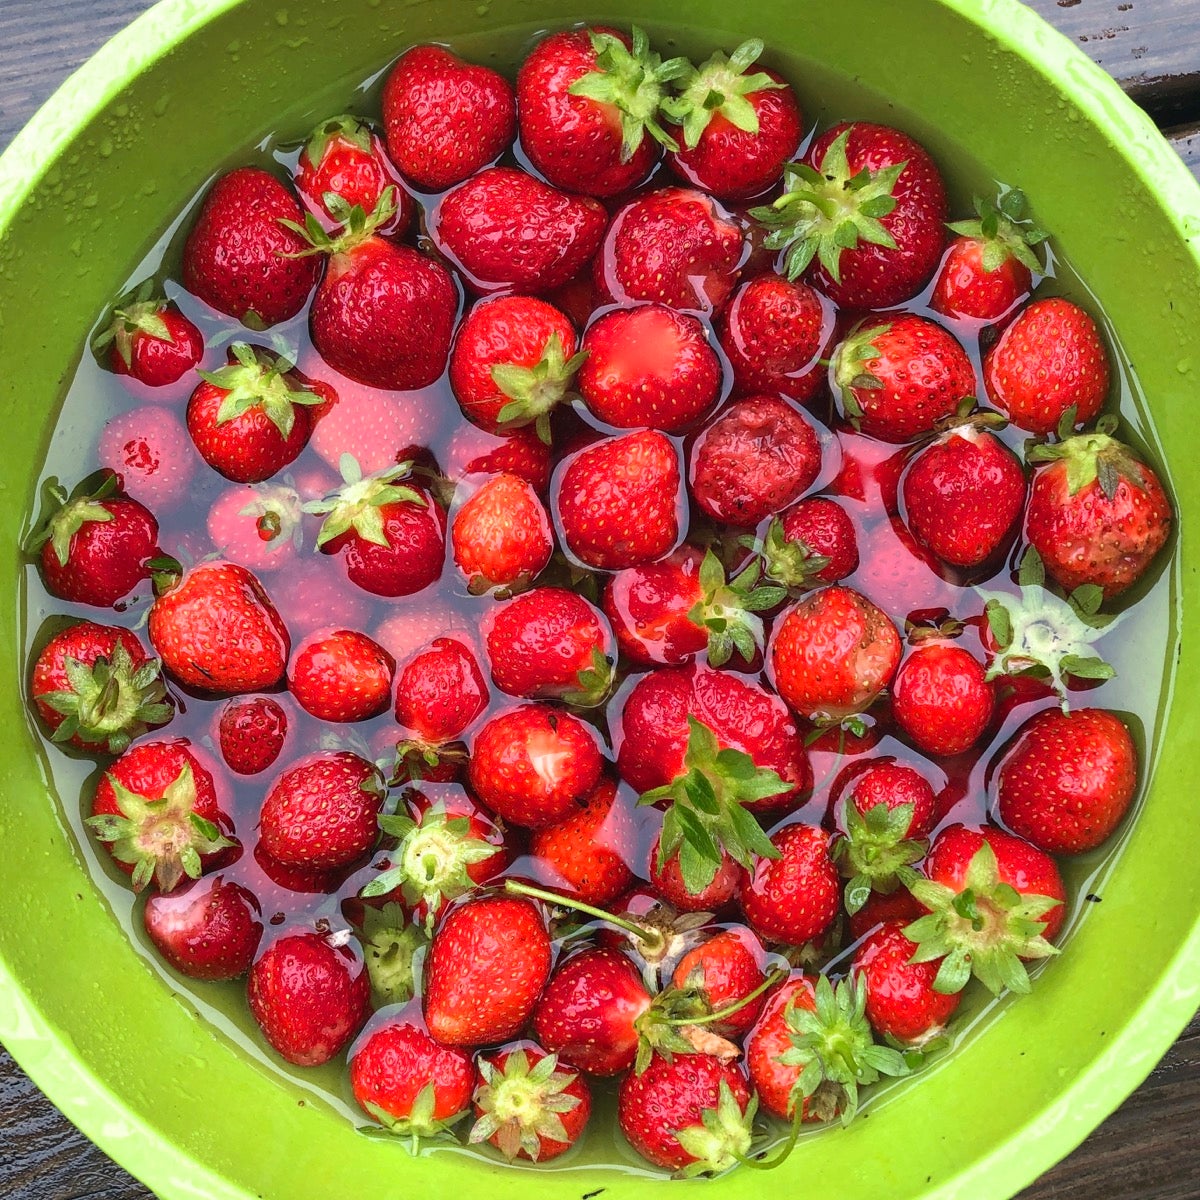 Fresh-picked strawberries soaking in a bowl of cold water with a splash of vinegar.